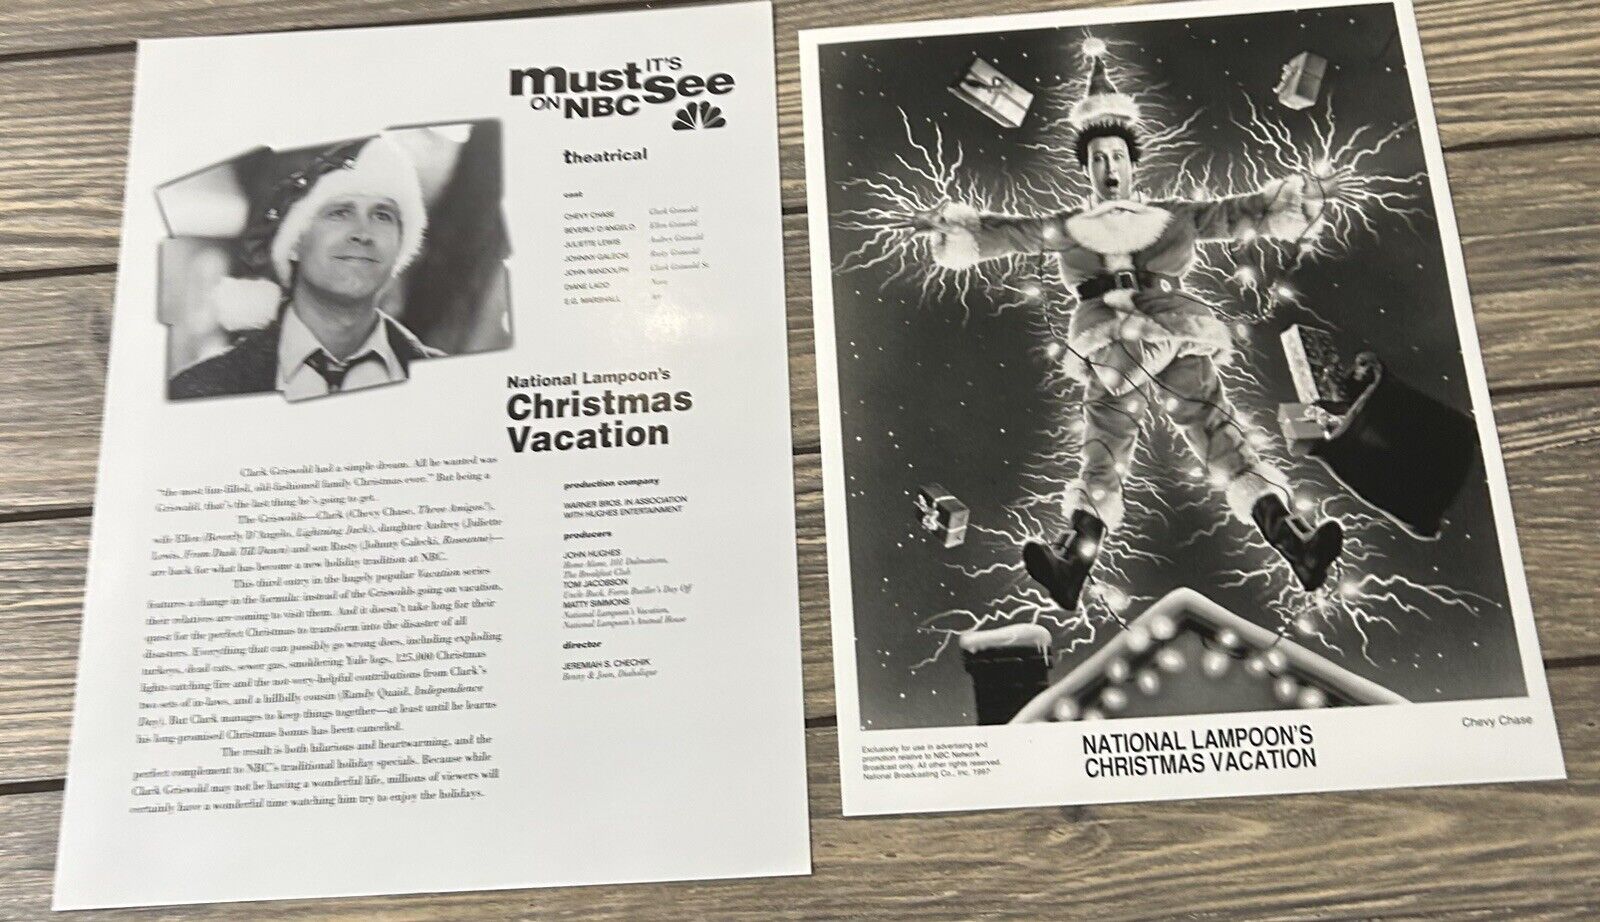 VTG NBC National Lampoons Christmas Vacation Press Release Photo and Fact Sheet